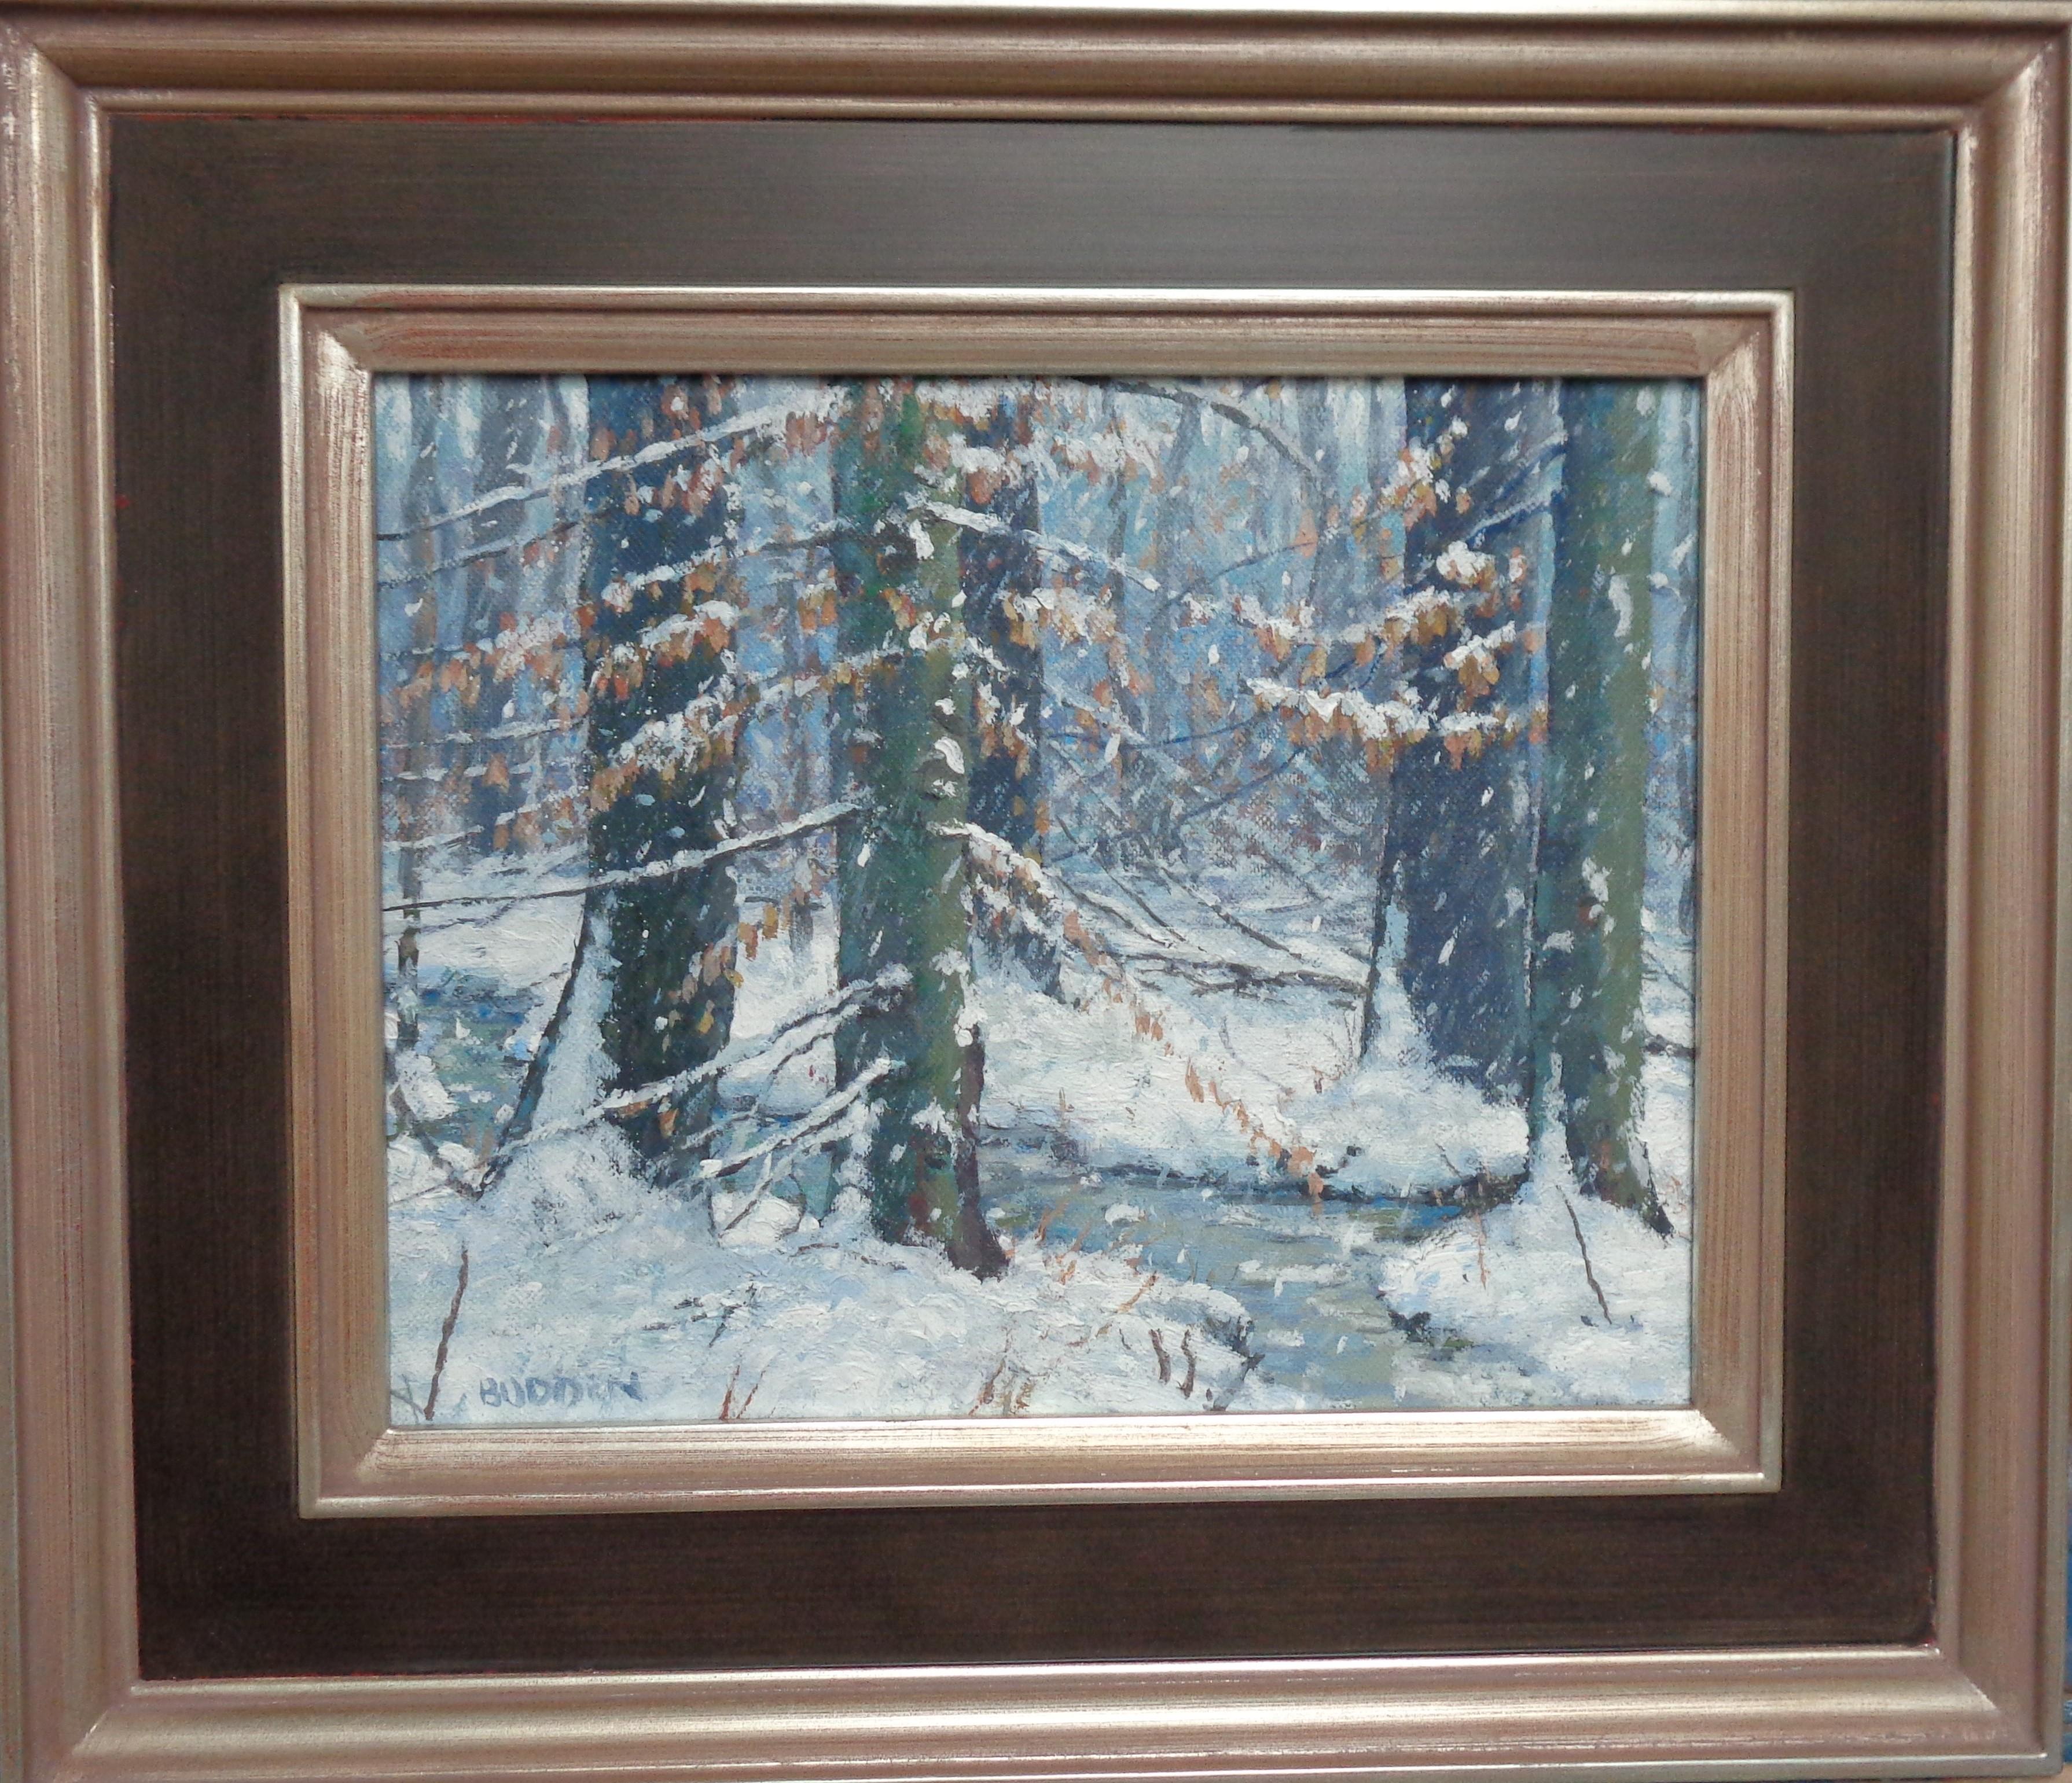 Winter Forrest Interior is an oil painting on canvas by award winning contemporary artist Michael Budden in an impressionistic realism style. The image measures 8n x 10 unframed and 12.63 x 14.63 framed.  
ARTIST'S STATEMENT
I have been in the art